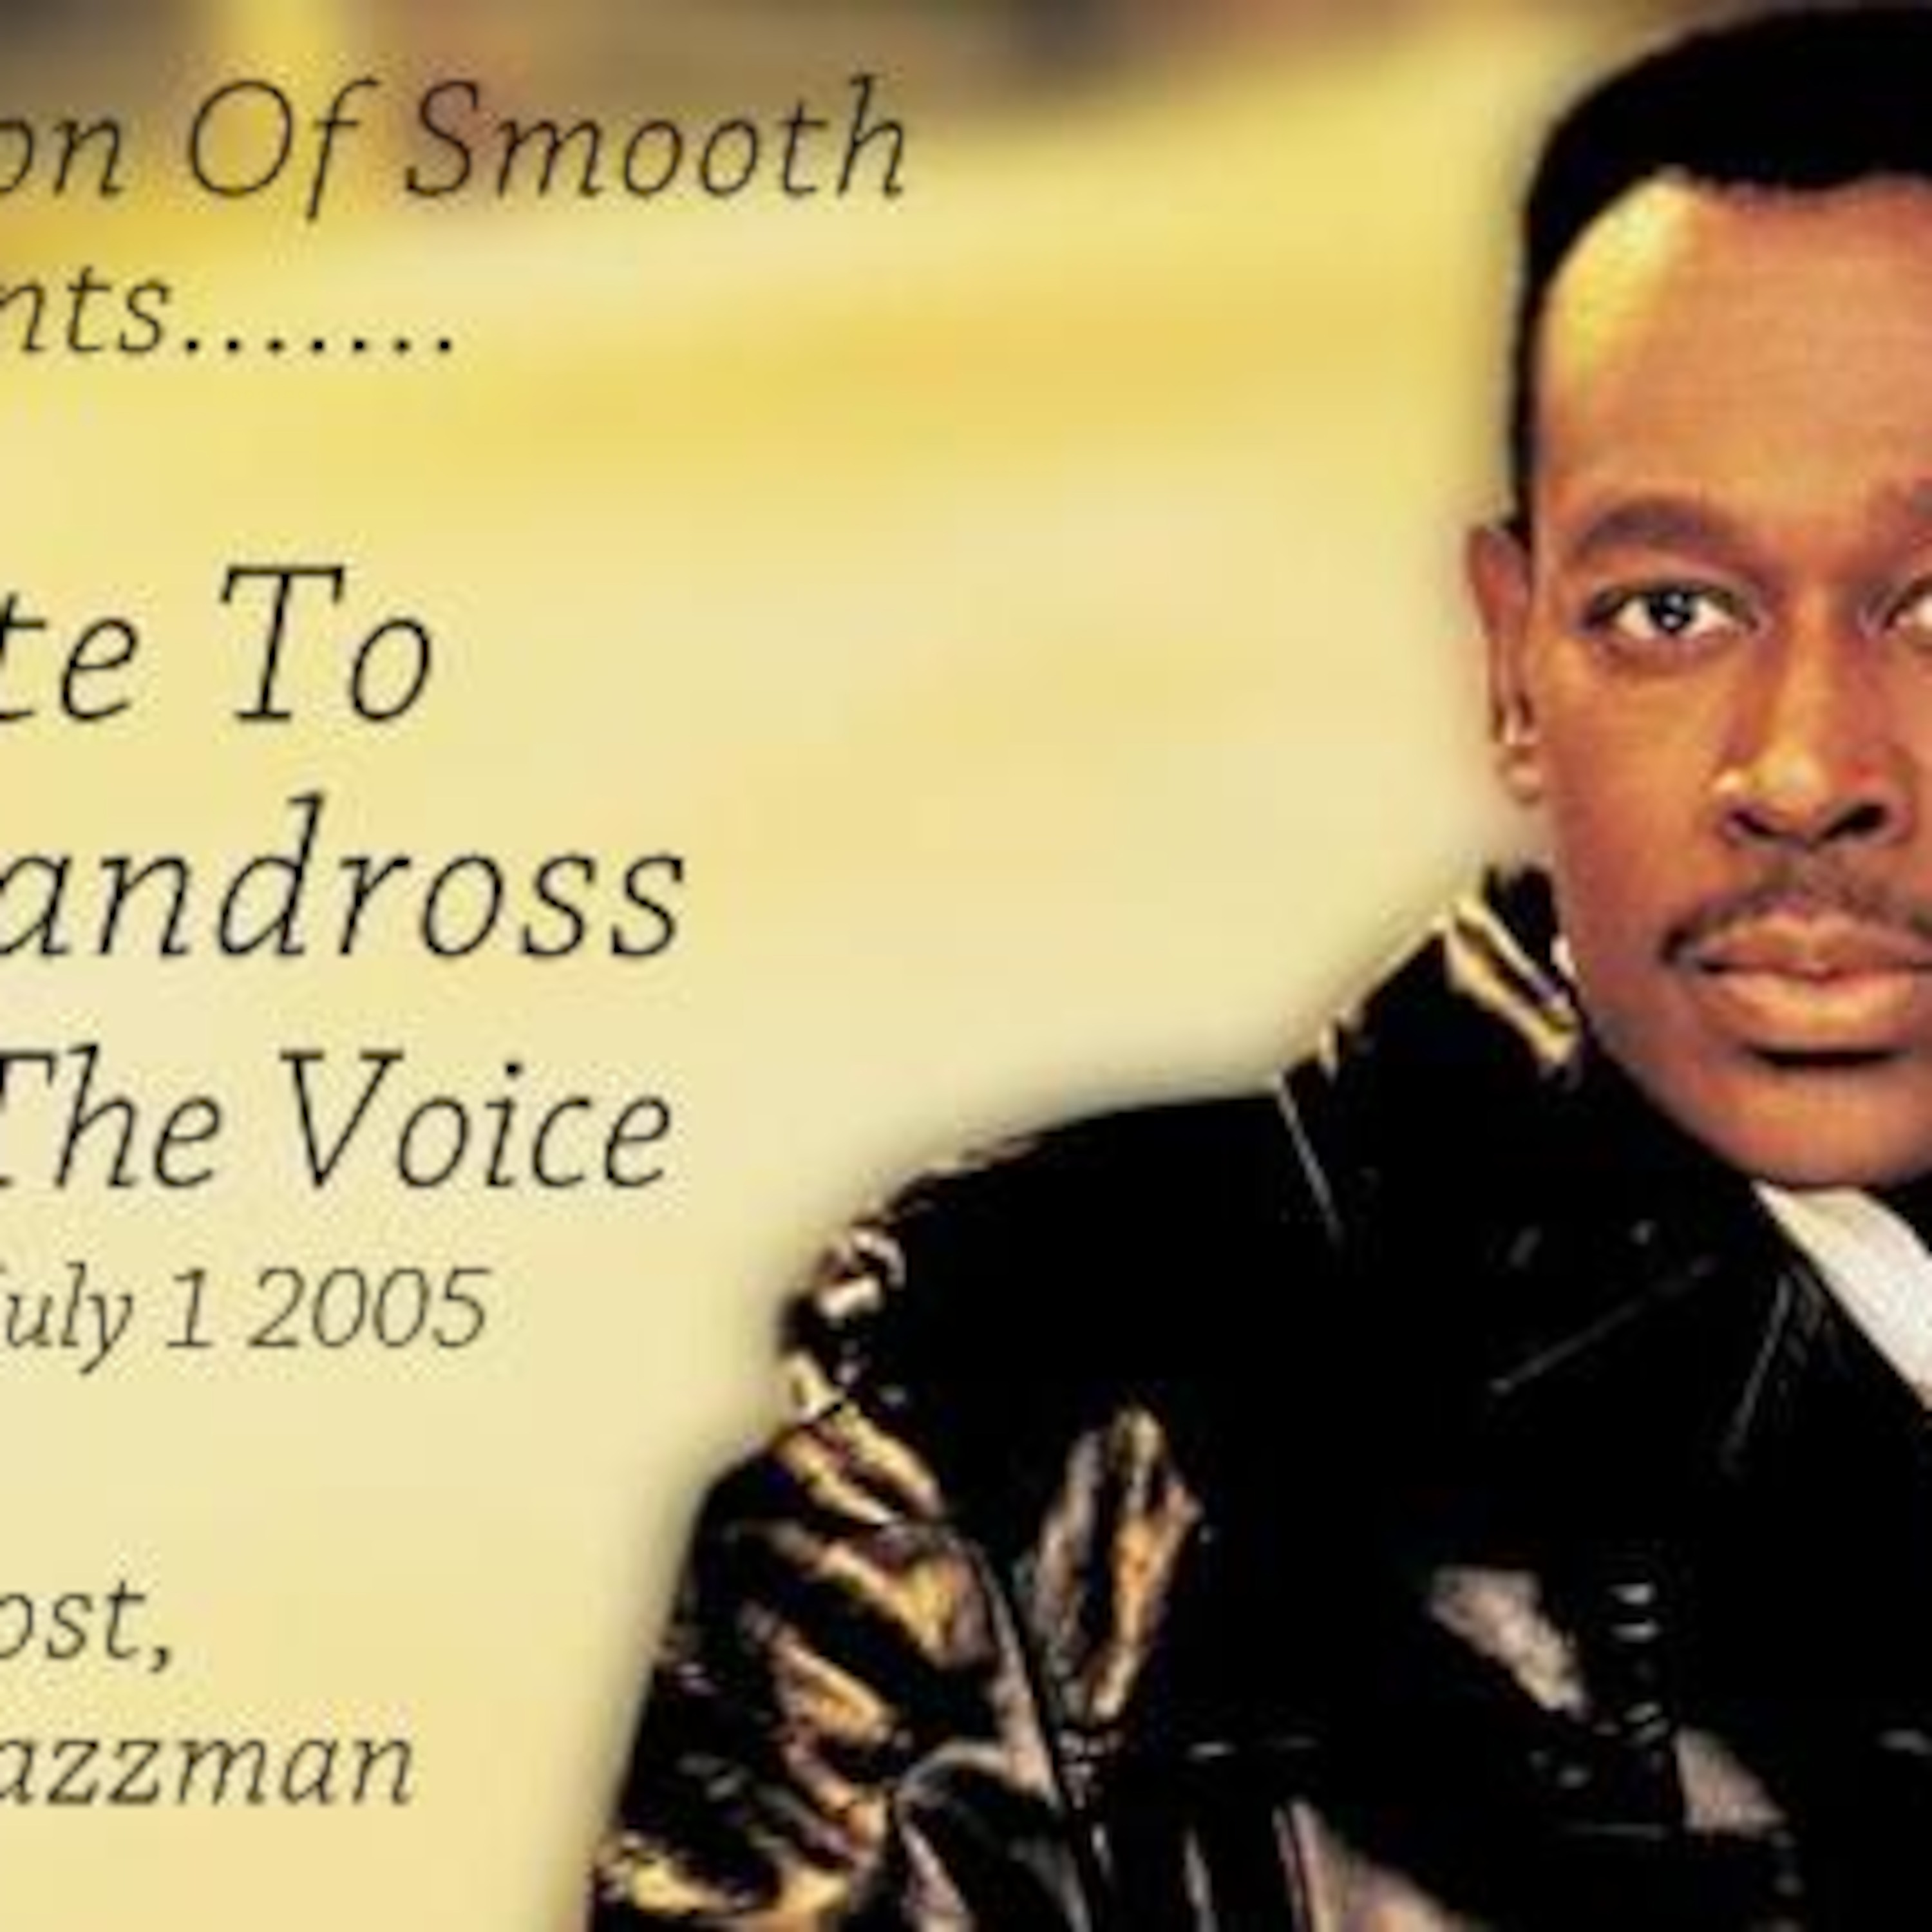 luther vandross songs youtube gregory hines